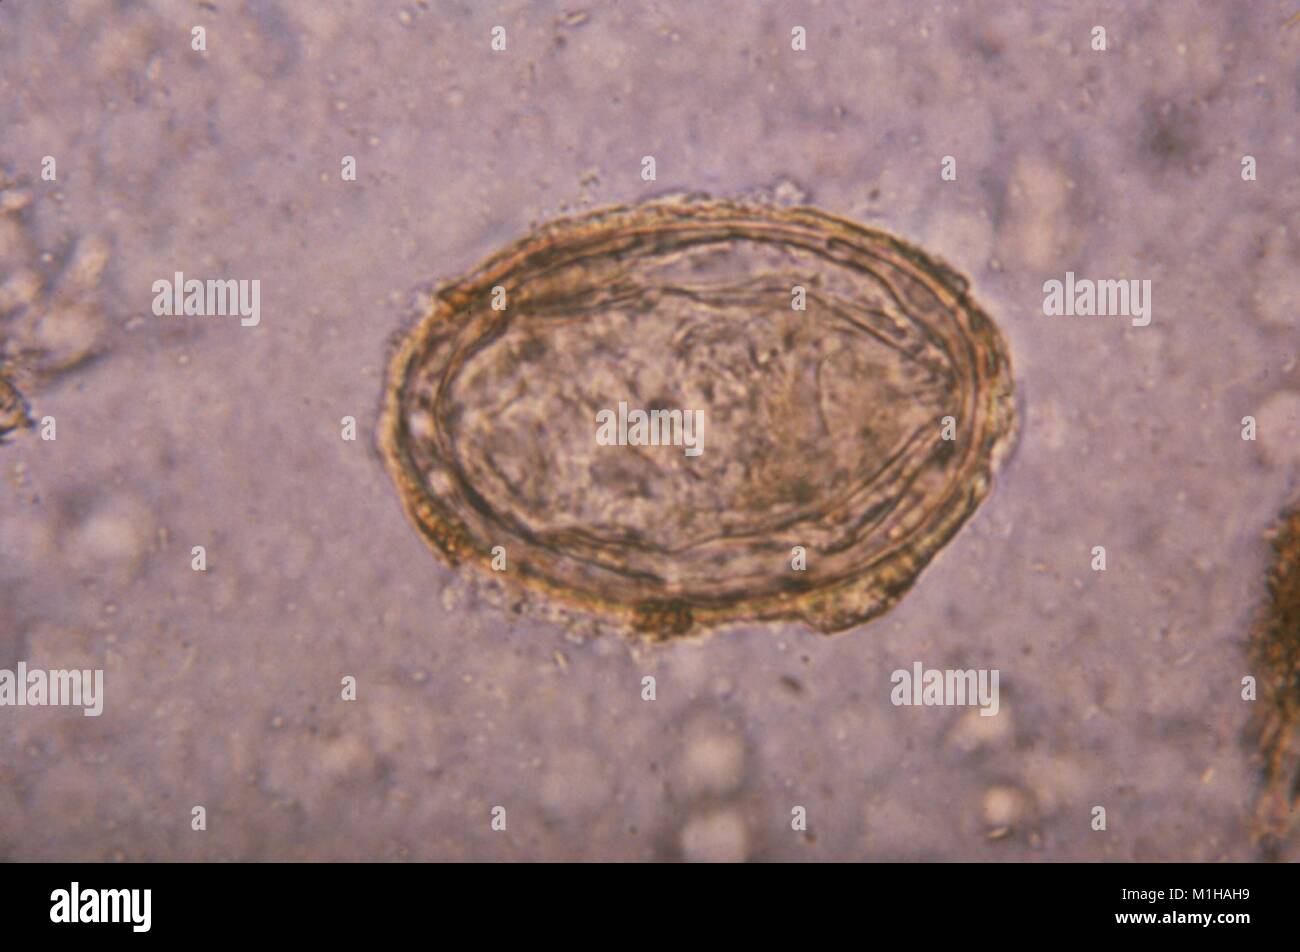 Photomicrograph of an egg from the trematode Schistosoma japonicum, one of the blood flukes that cause the parasitic disease Schistosomiasis, 1979. Image courtesy CDC. () Stock Photo